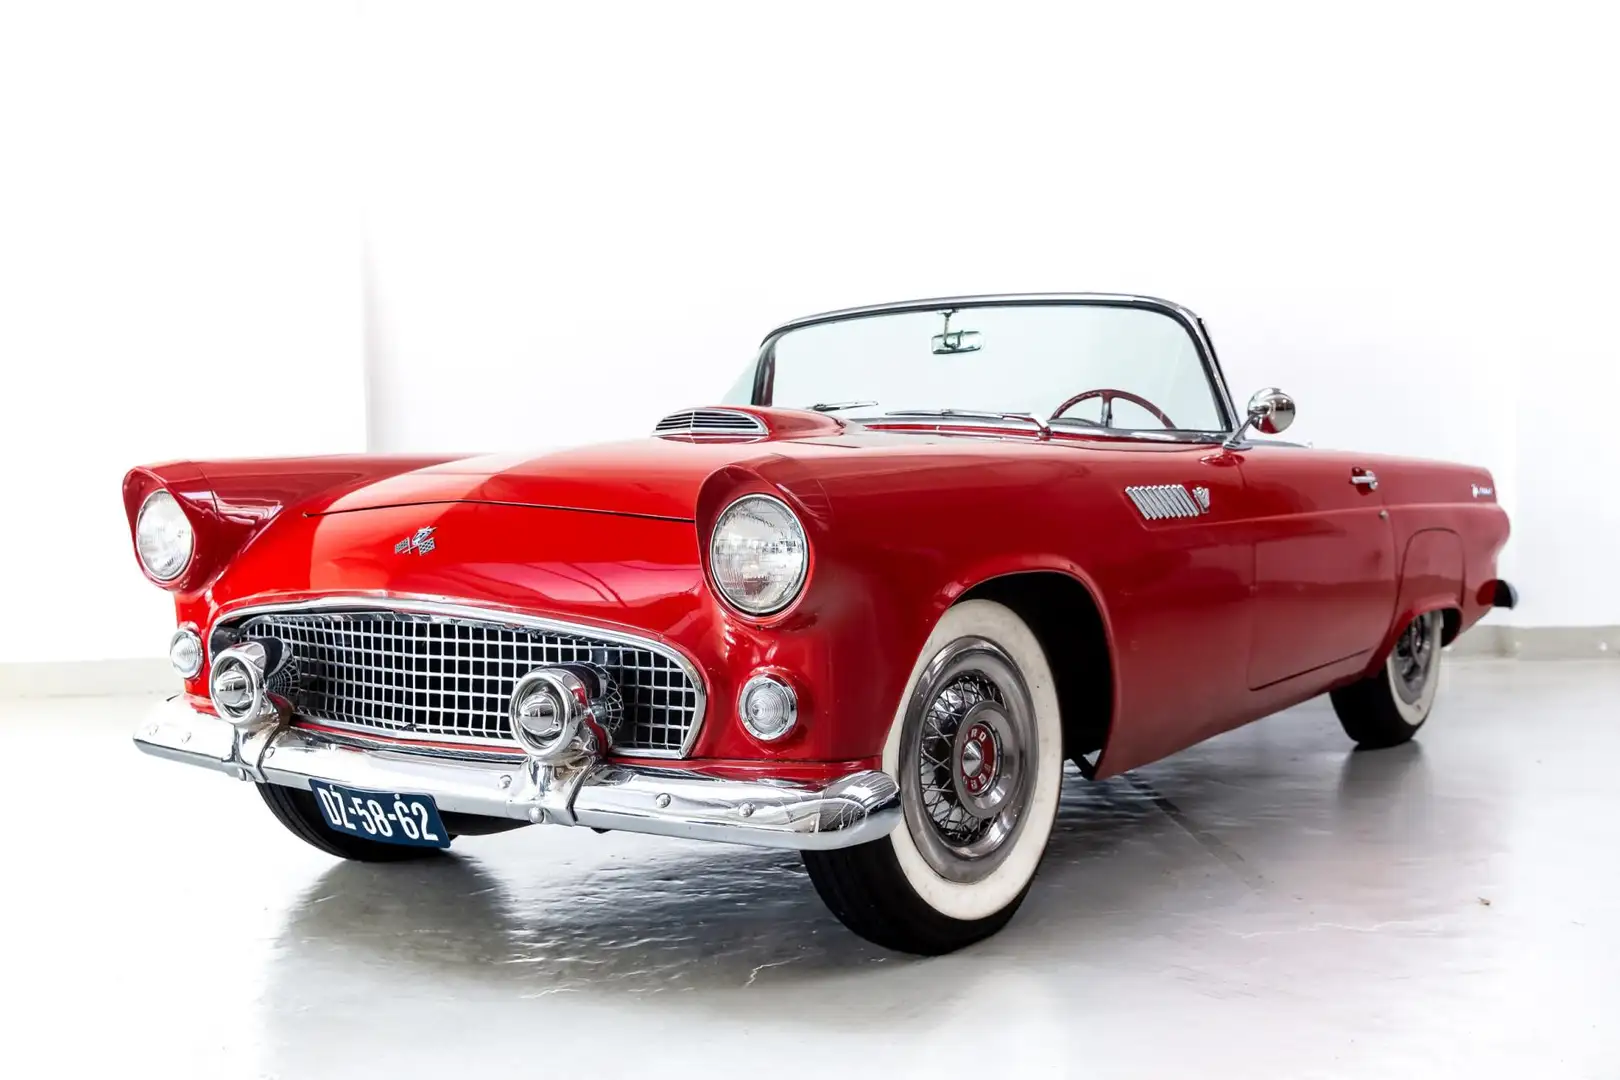 Ford Thunderbird - Y Block V8 - Collectors Car Red - 1